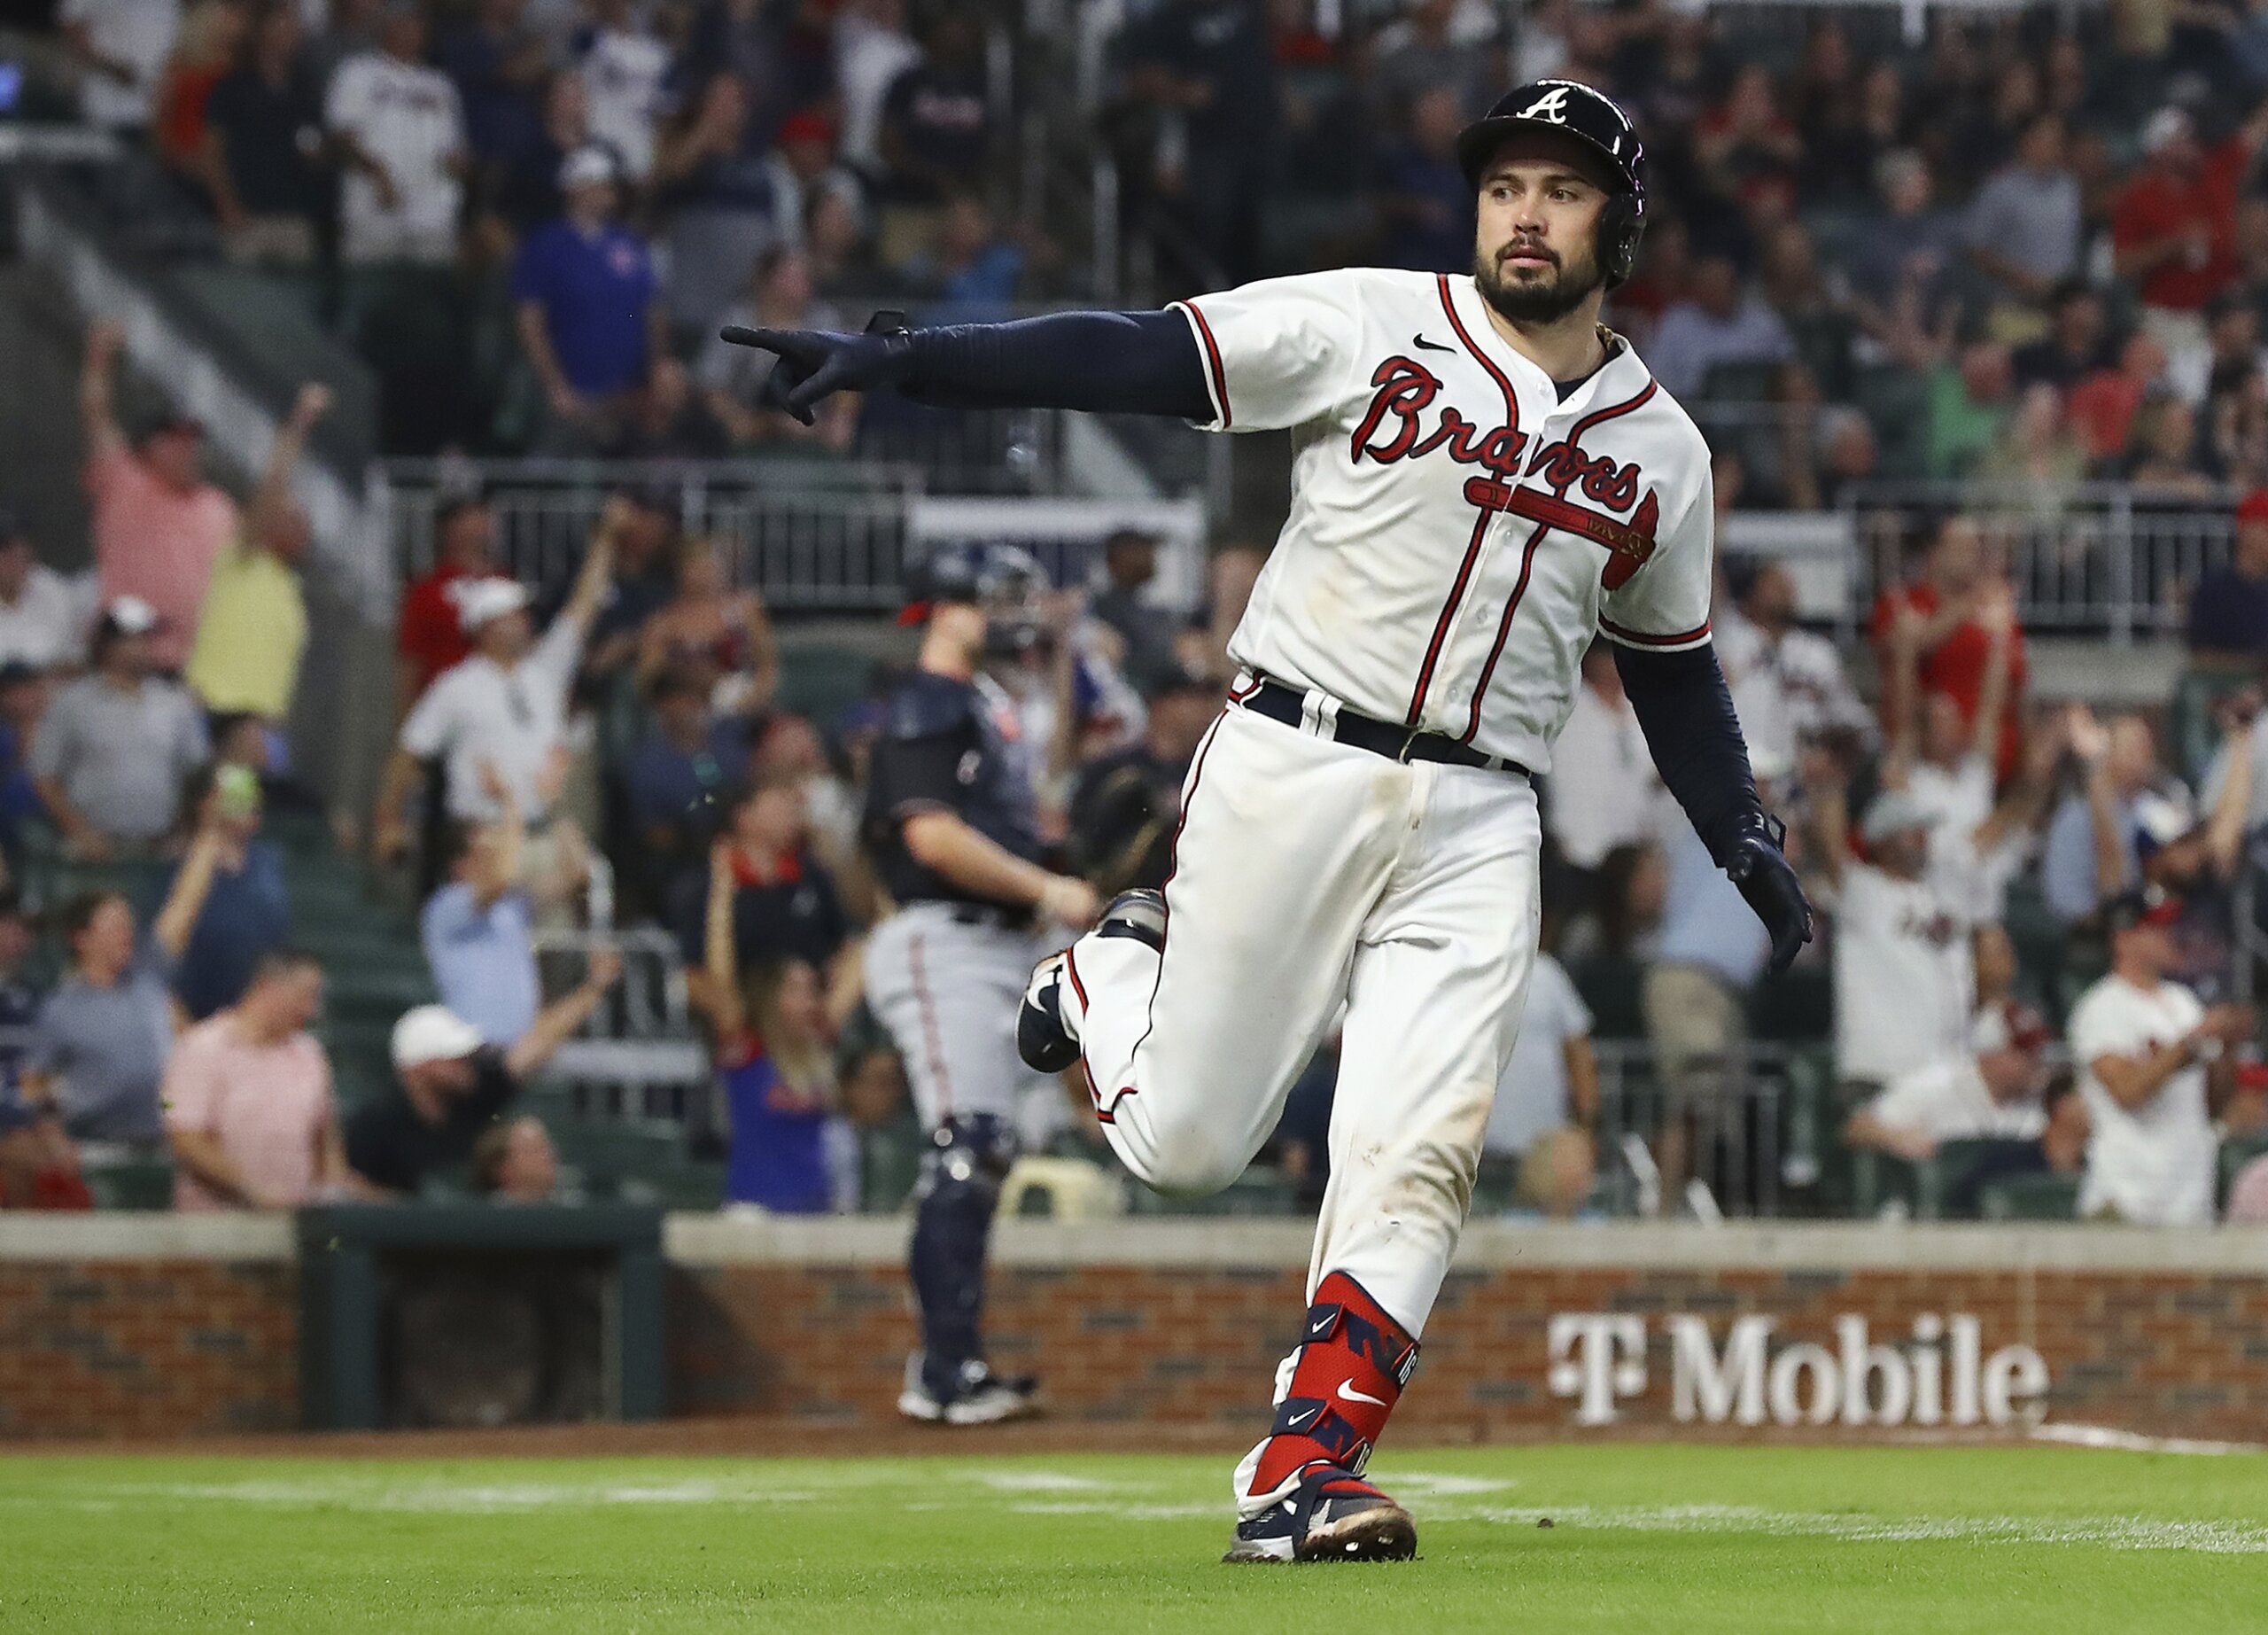 Swanson's walk-off homer gives Braves 7-6 win over Nationals